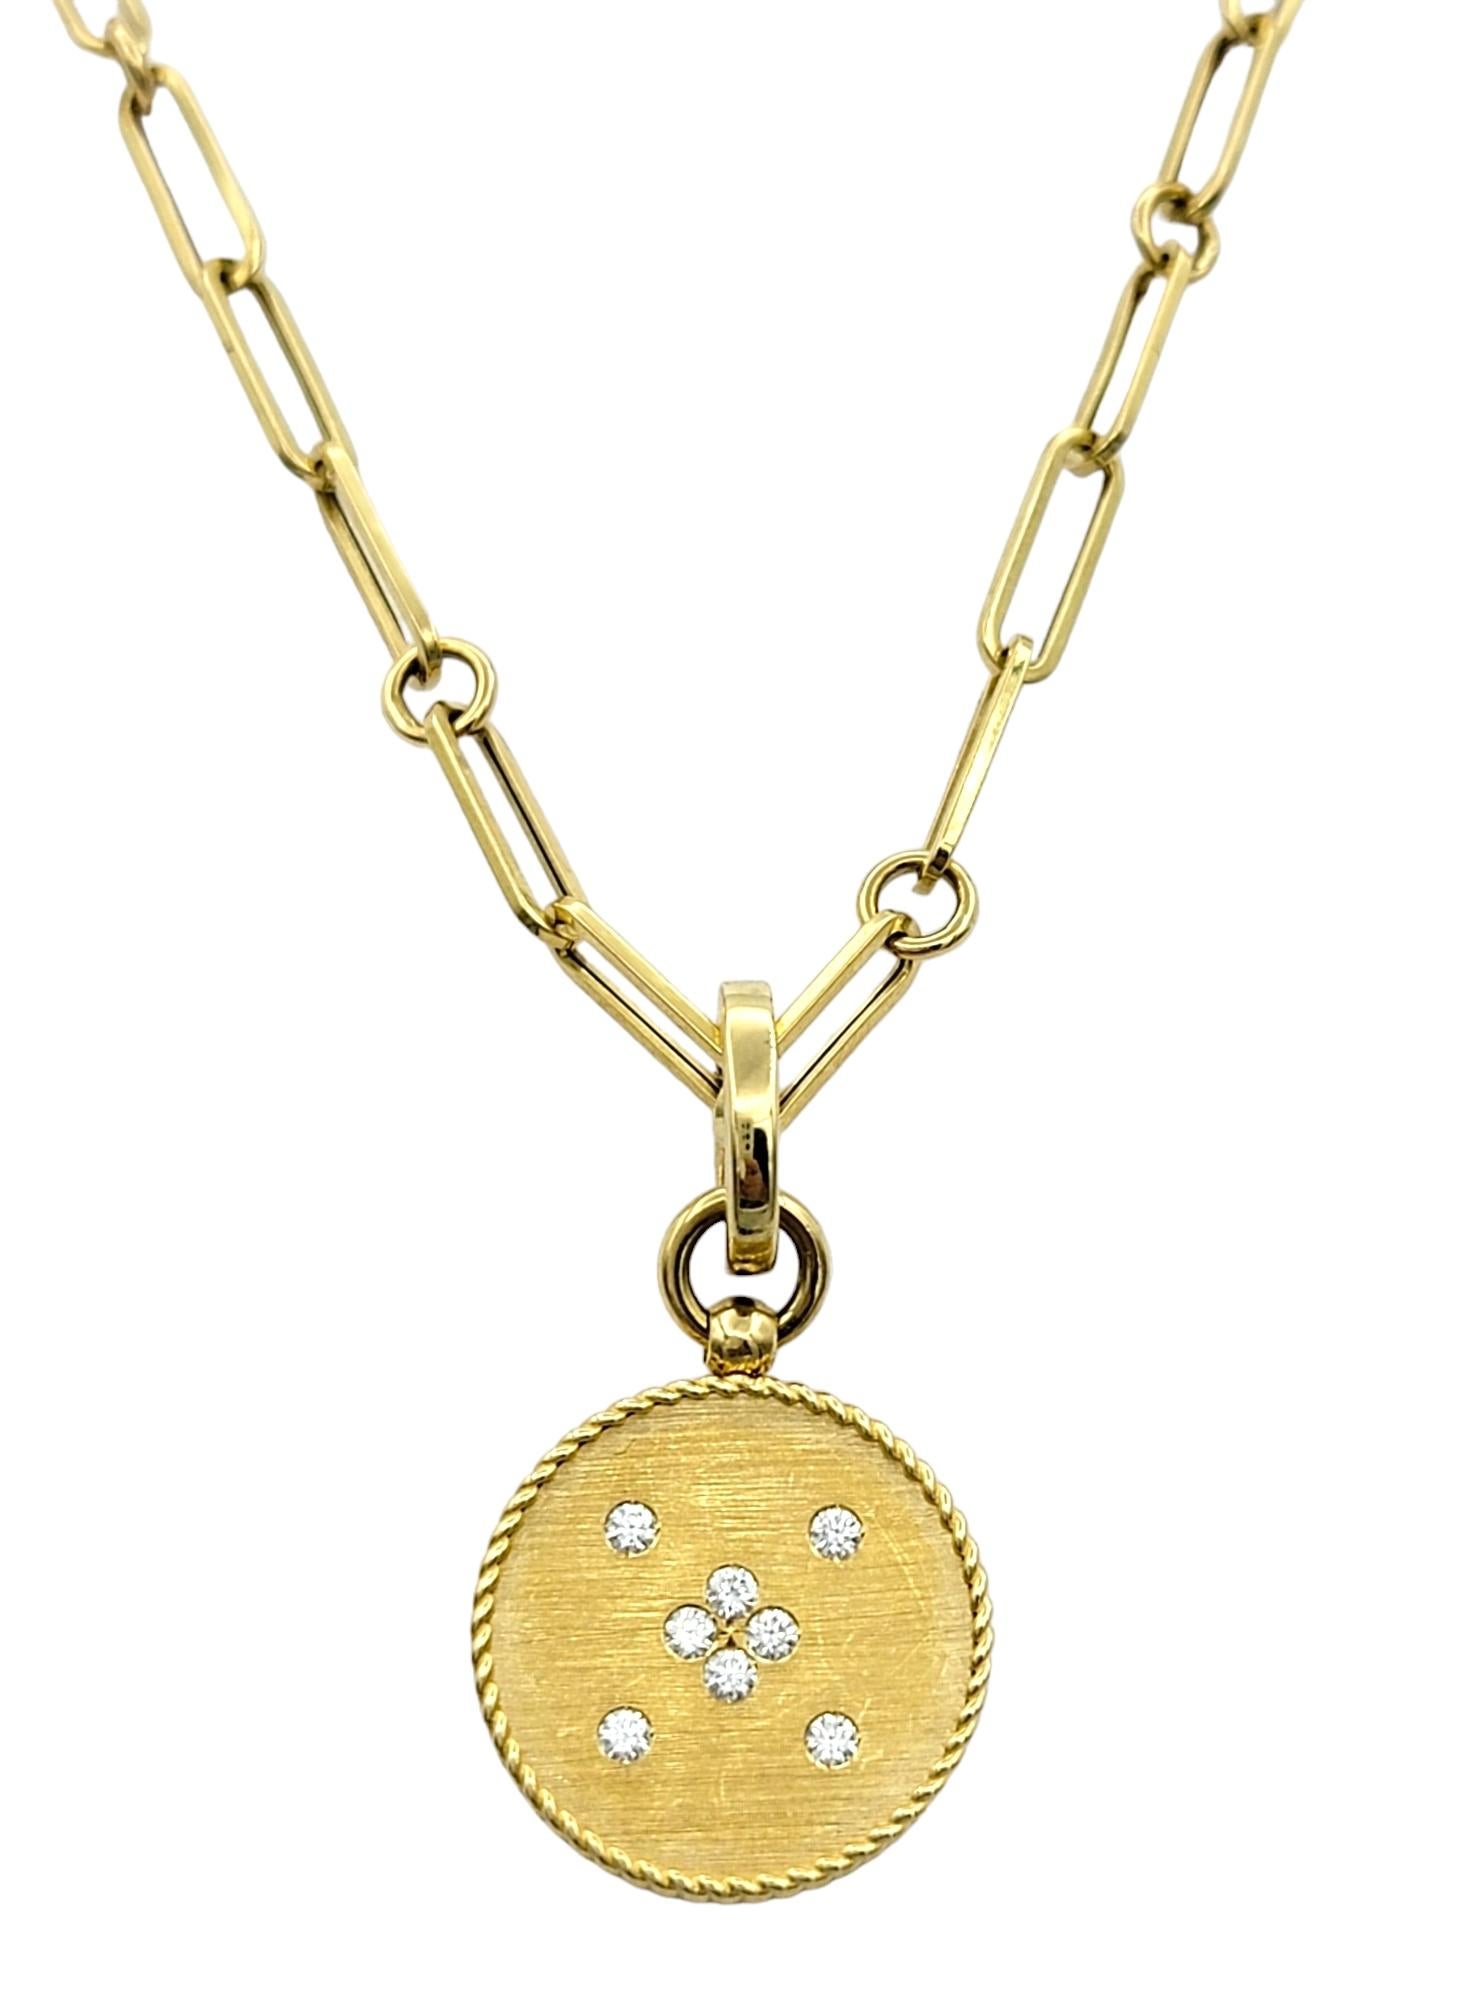 This stunning Roberto Coin Diamond Scorpio Zodiac necklace is a celestial masterpiece that seamlessly blends luxurious craftsmanship with astrological symbolism. Crafted from opulent 18-karat yellow gold, the pendant features the Greek symbol for